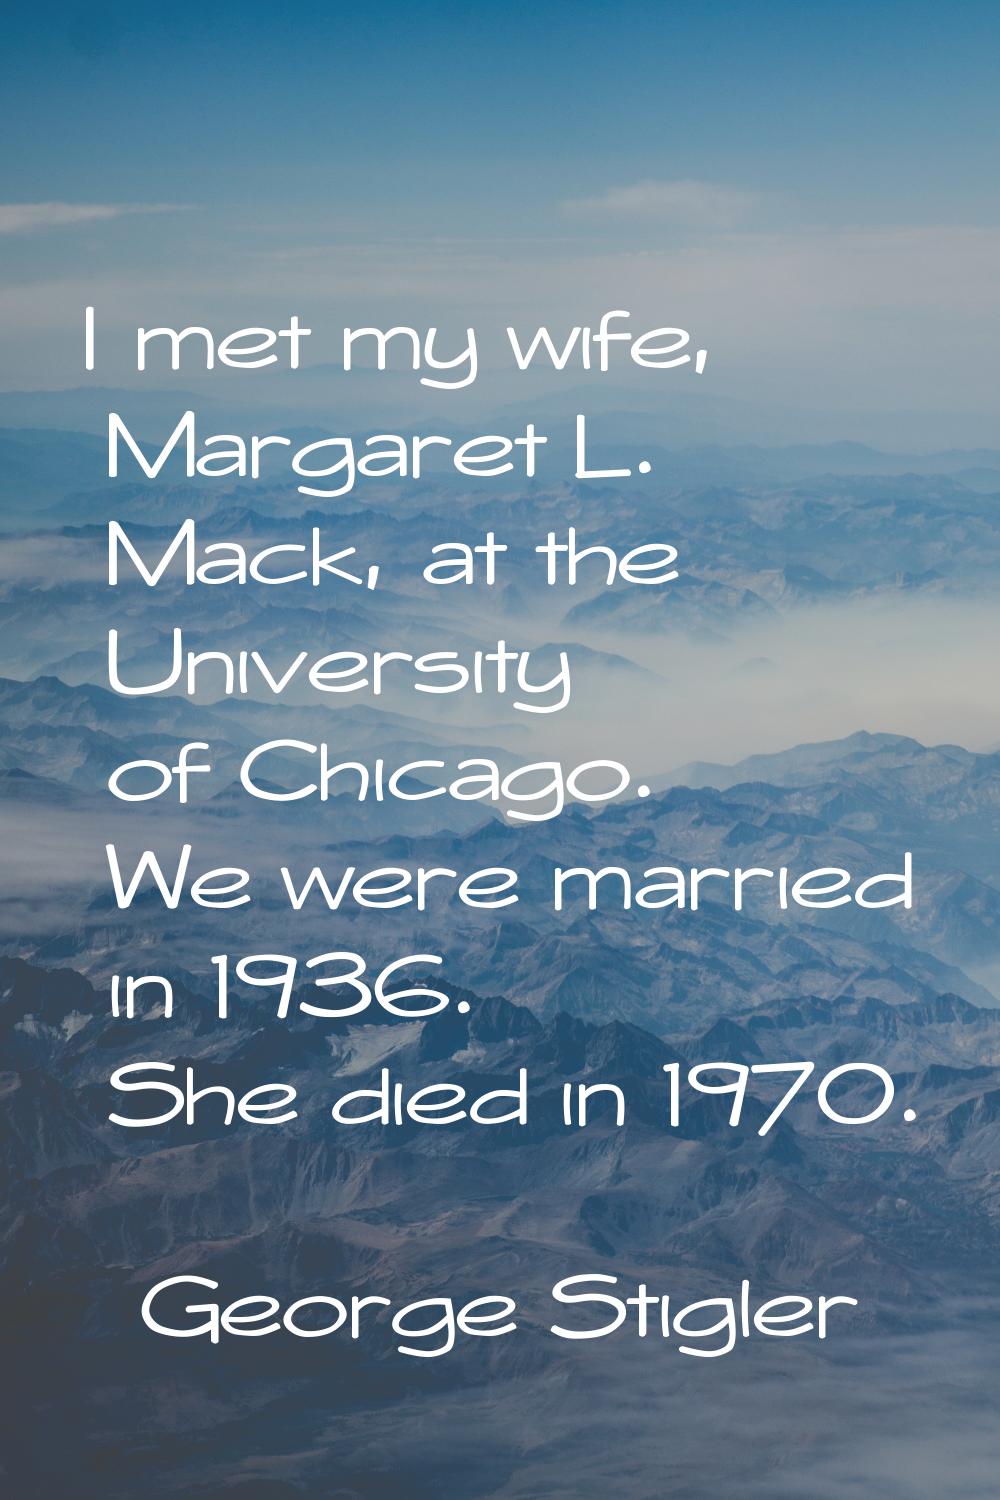 I met my wife, Margaret L. Mack, at the University of Chicago. We were married in 1936. She died in